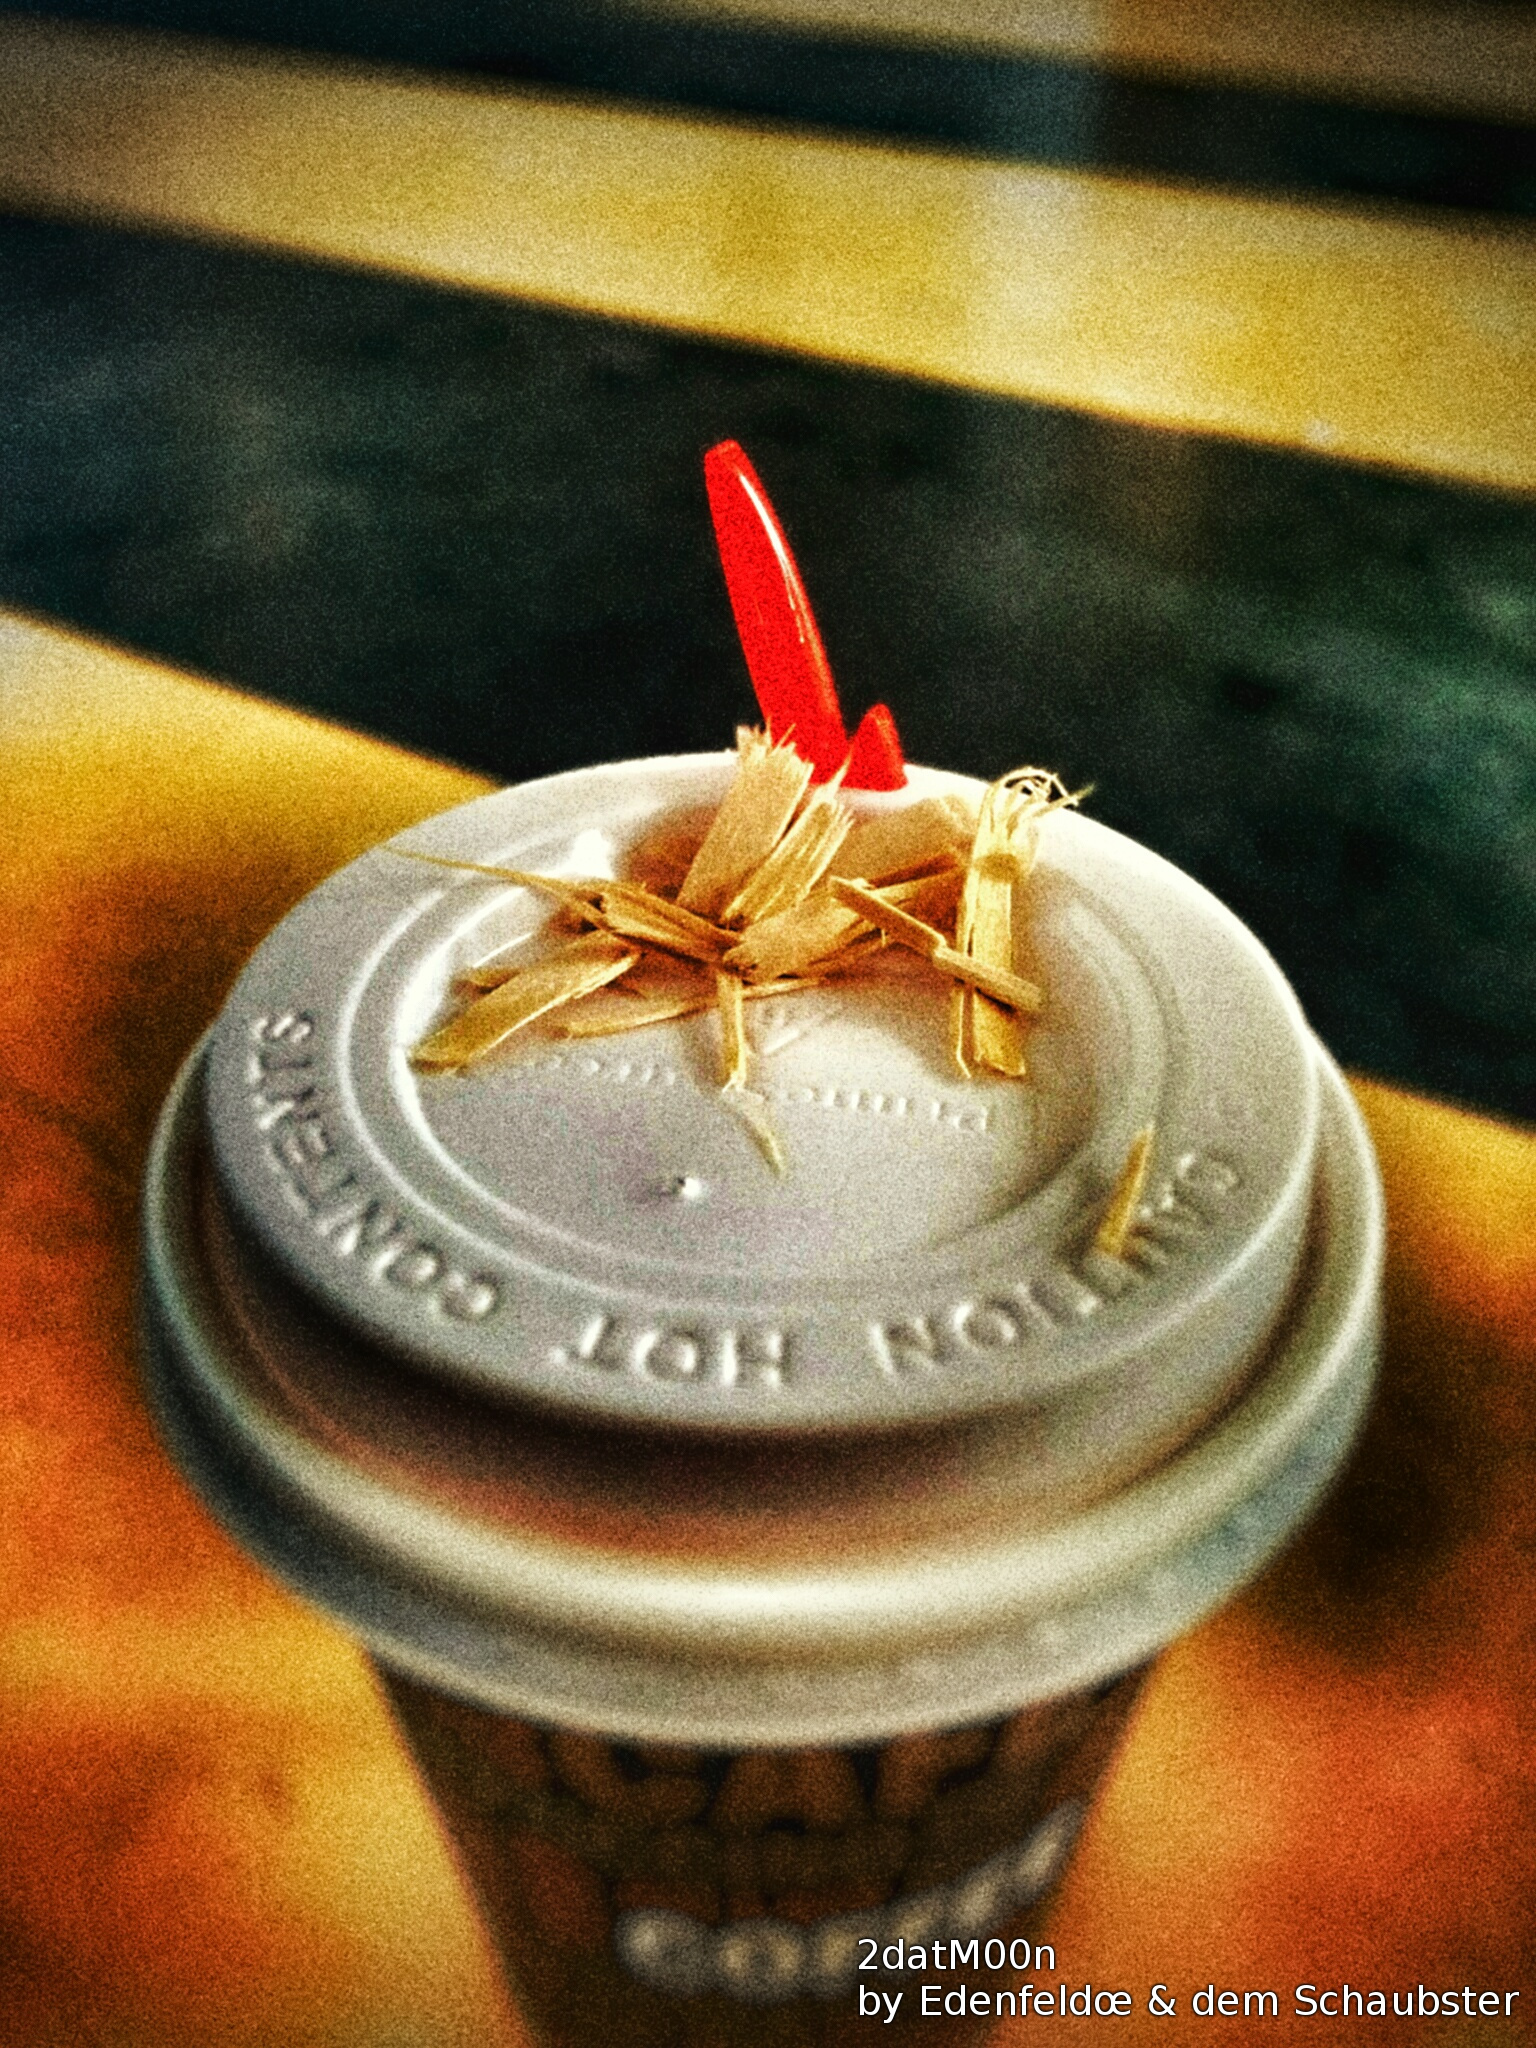 Artistic image of a paper coffee cup with what looks like a red rocket taking of from it.